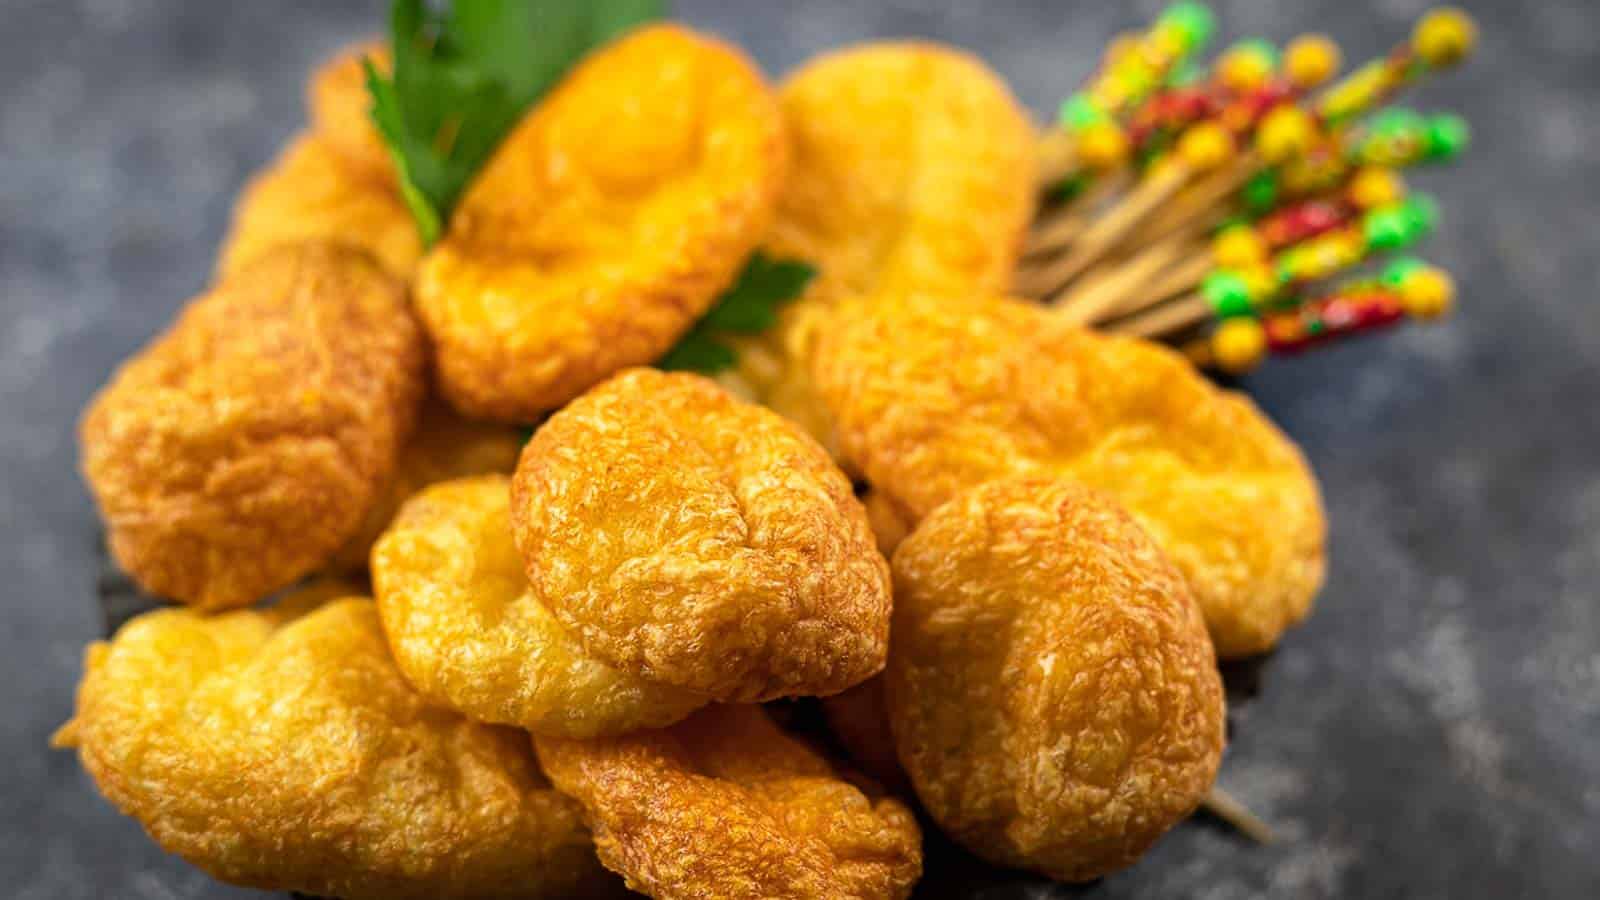 <p>Get ready to embrace the addictive crunch of cheese puffs made in the air fryer. These bites offer a satisfying mix of cheesiness and crispiness that’s hard to resist. Whether snacking solo or sharing, they’re a flavorful and enjoyable option that adds a burst of joy to your appetizer spread.<br><strong>Get the Recipe: </strong><a href="https://www.lowcarb-nocarb.com/cheese-puffs-air-fryer/?utm_source=msn&utm_medium=page&utm_campaign=msn">Cheese Puffs Air Fryer</a></p>